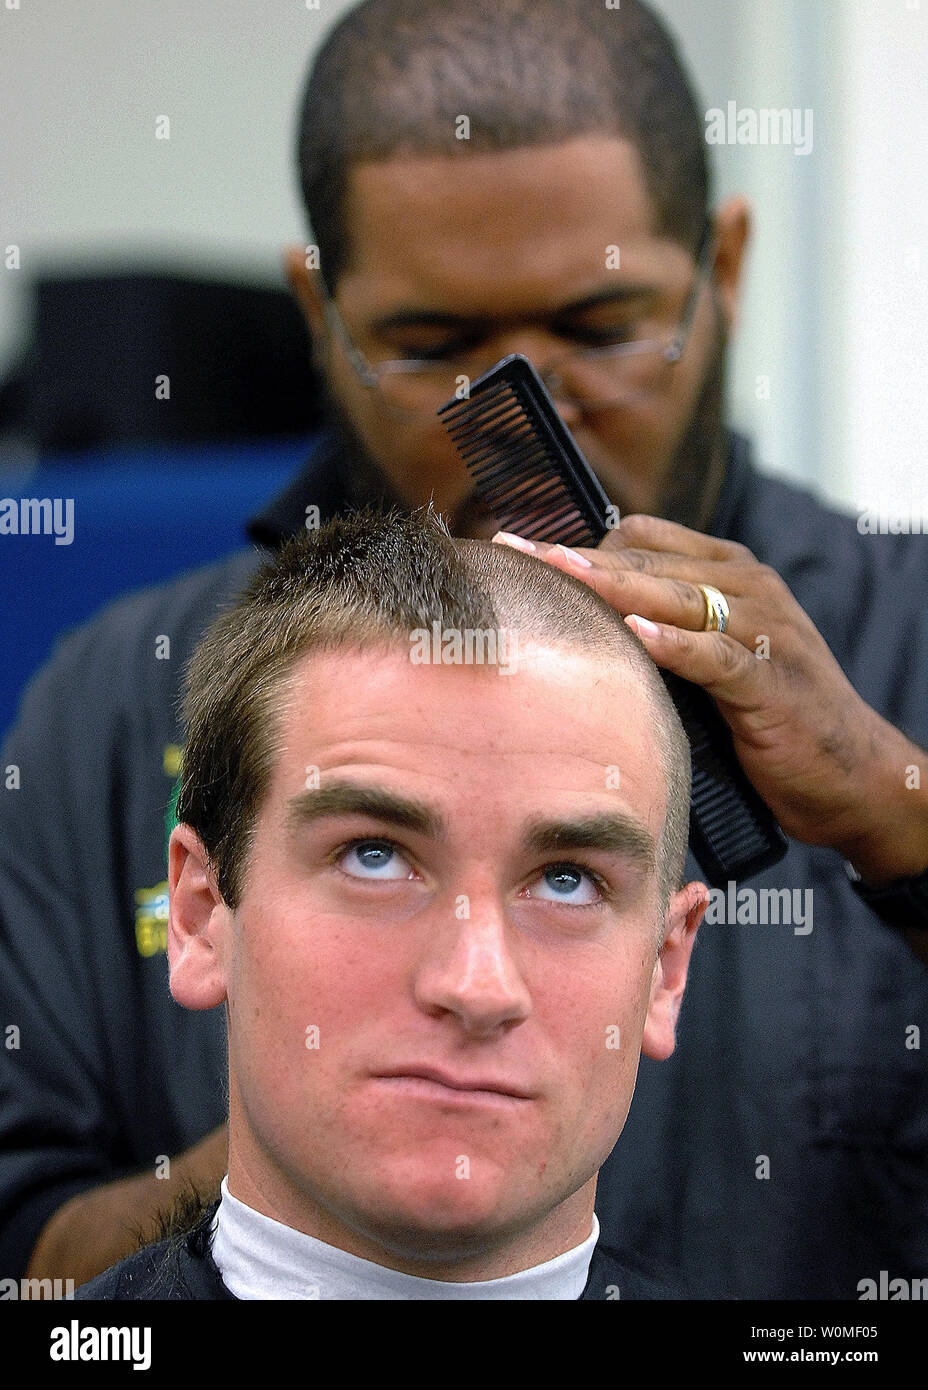 A plebe receives his first Navy haircut during Induction Day at the U.S. Naval Academy in Annapolis, Maryland on July 1, 2009. Induction Day is the beginning of Plebe Summer, a demanding seven-week orientation that marks the period that roughly 1,200 selected candidates are transformed from civilians to Midshipmen. (UPI Photo/Gin Kai/U.S. Navy) Stock Photo